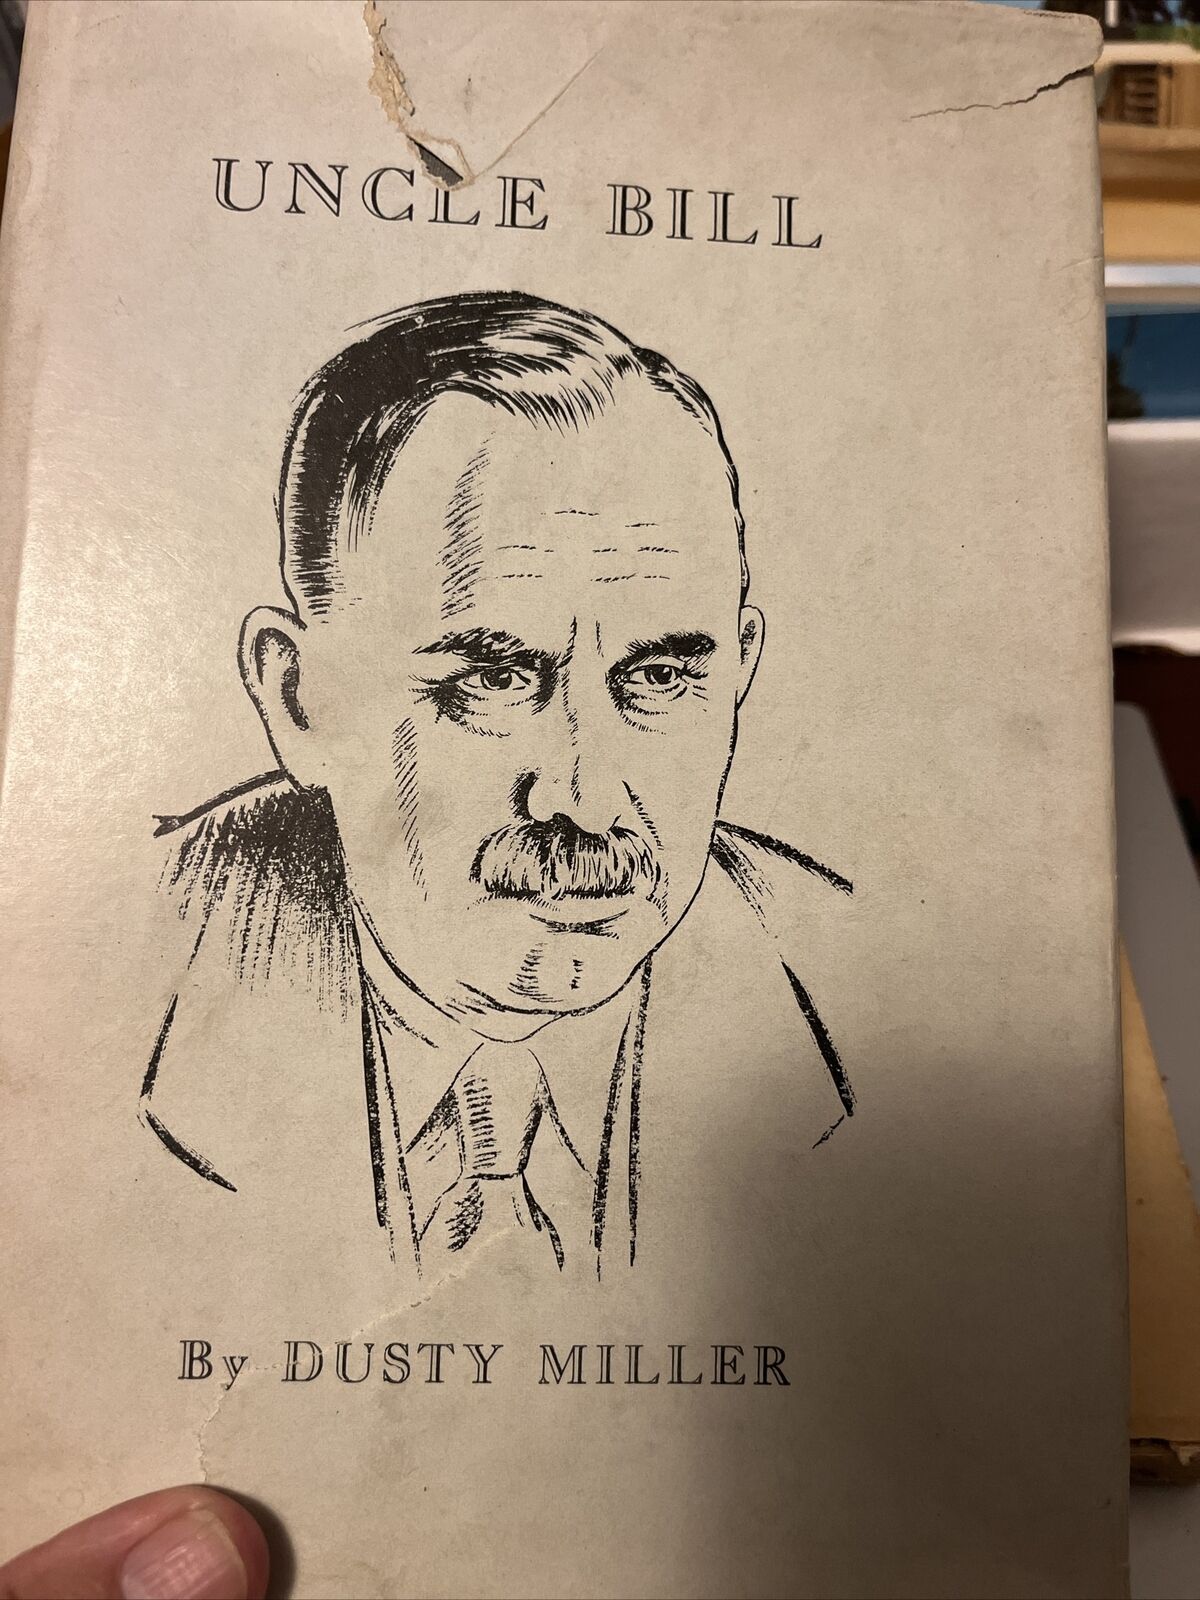 UNCLE BILL by Dusty Miller - 1943 - SIGNED COPY - First Edition - Biography